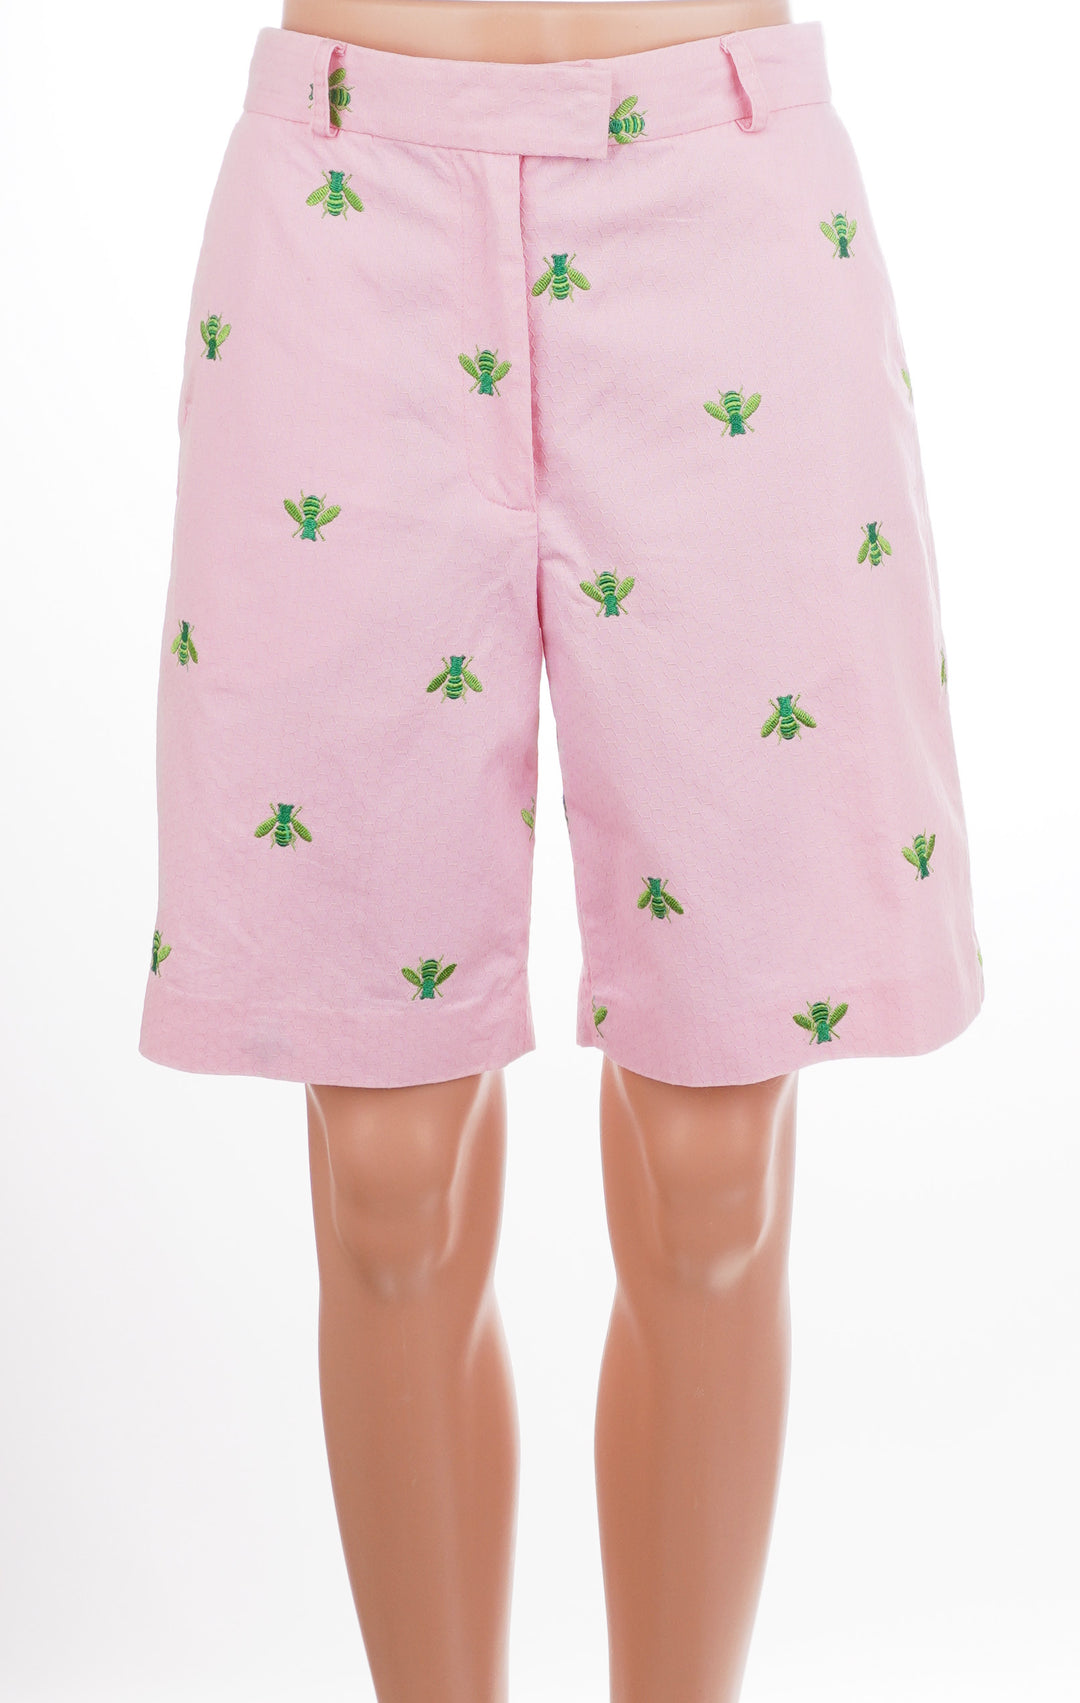 Lilly Pulitzer Honeycomb Bee Shorts - Pink/Green - Size 2 - Skorzie